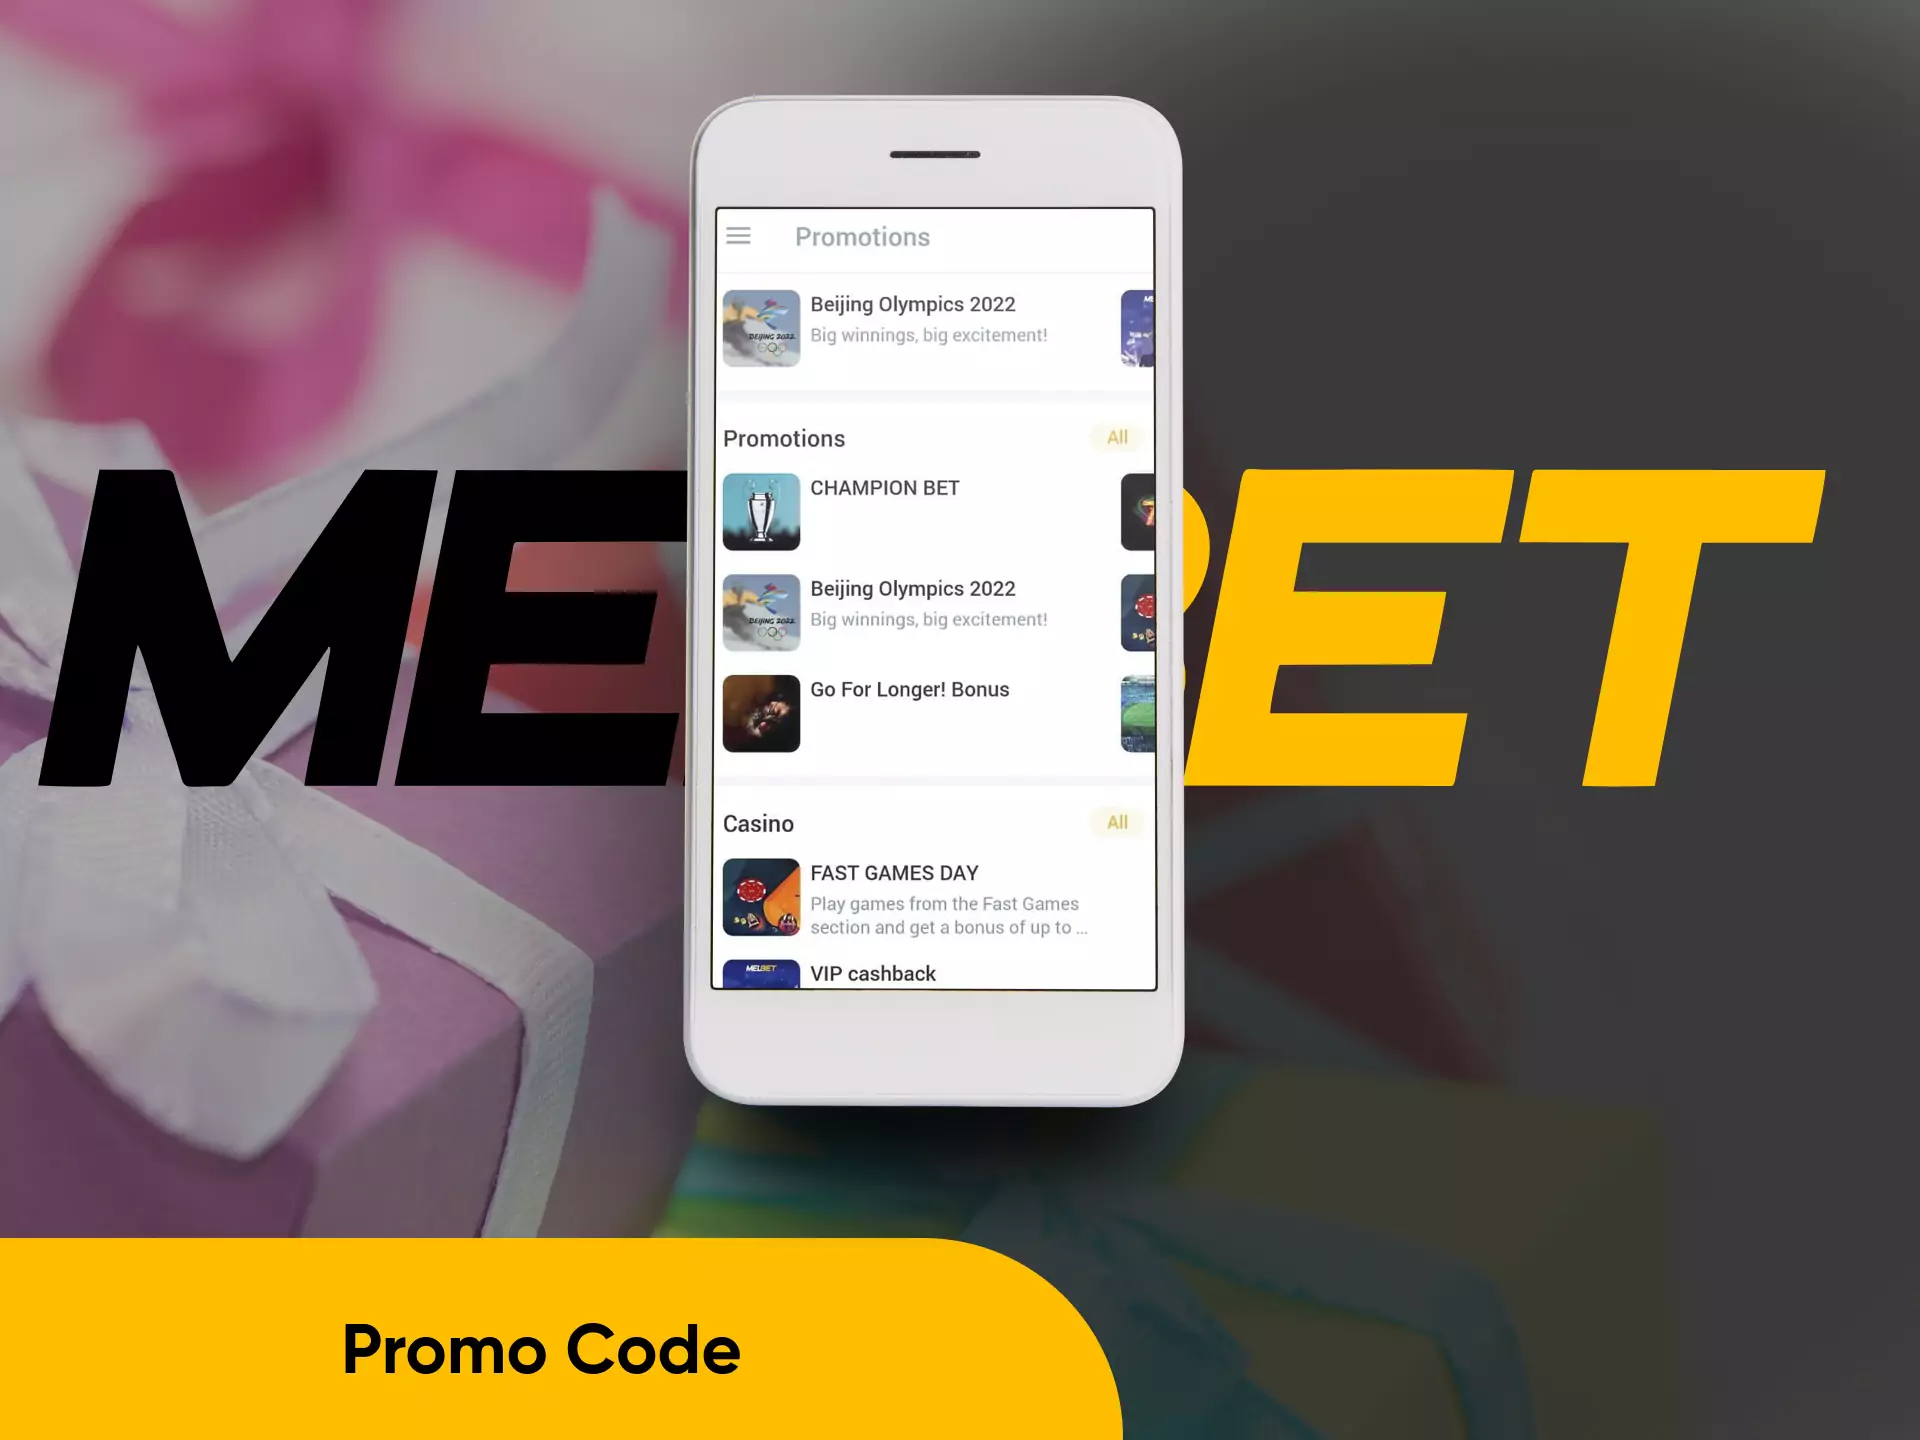 You can increase your profit with the promo code in the Melbet app.